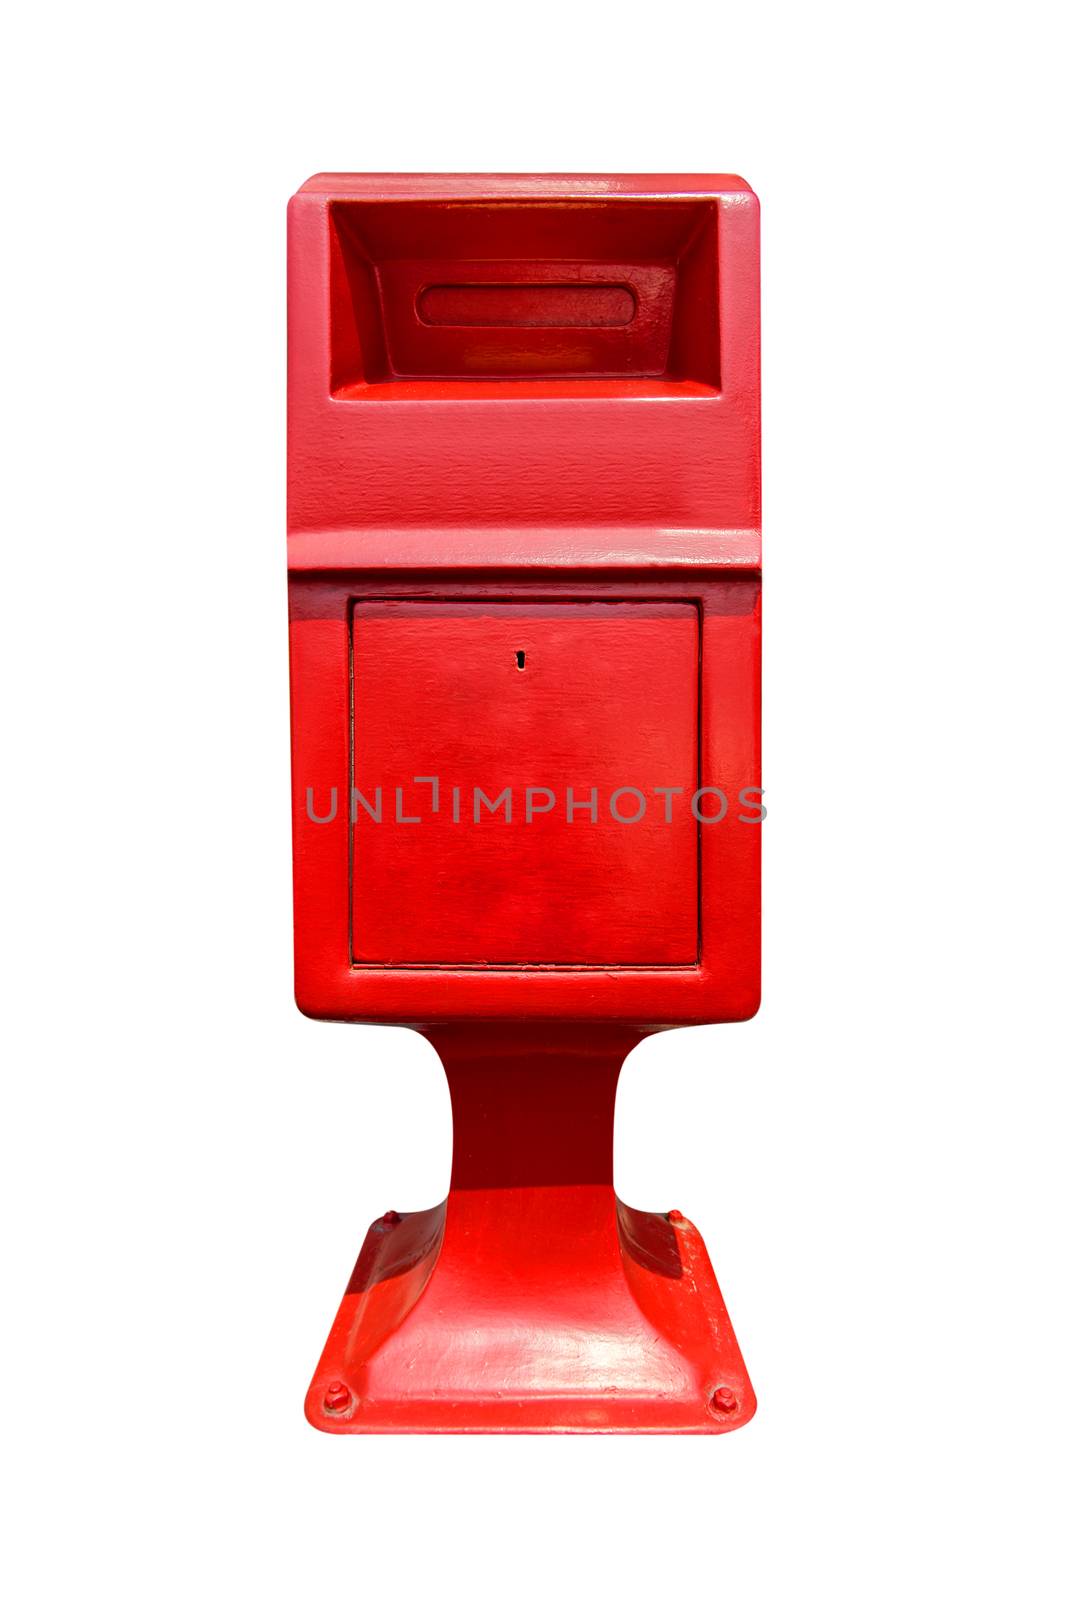 Red postbox isolated on white background. by gutarphotoghaphy